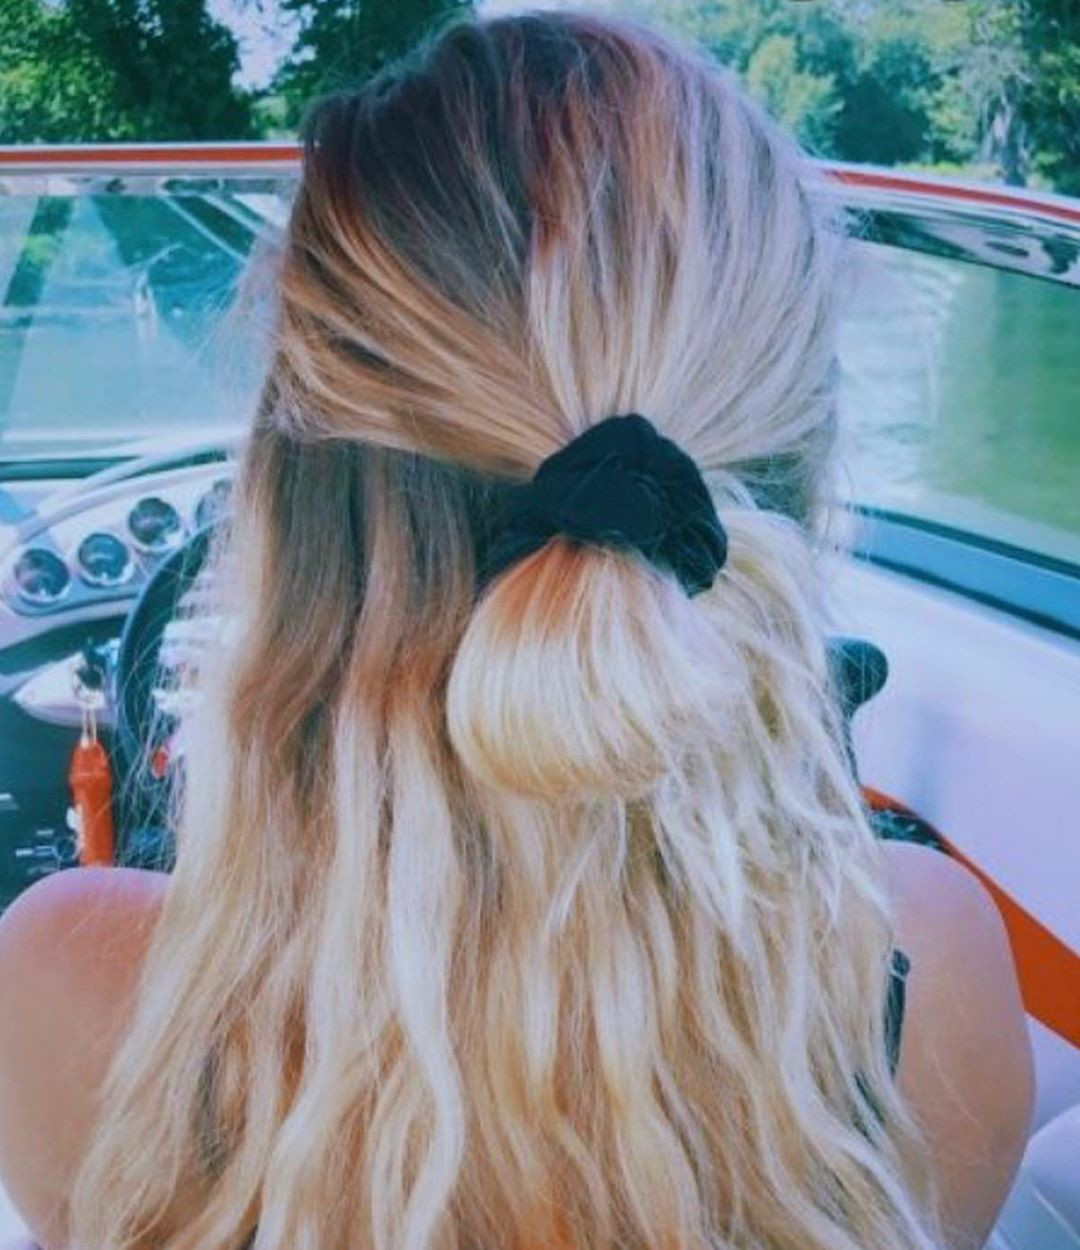 45 Best VSCO Hairstyles You'll Want To Copy,